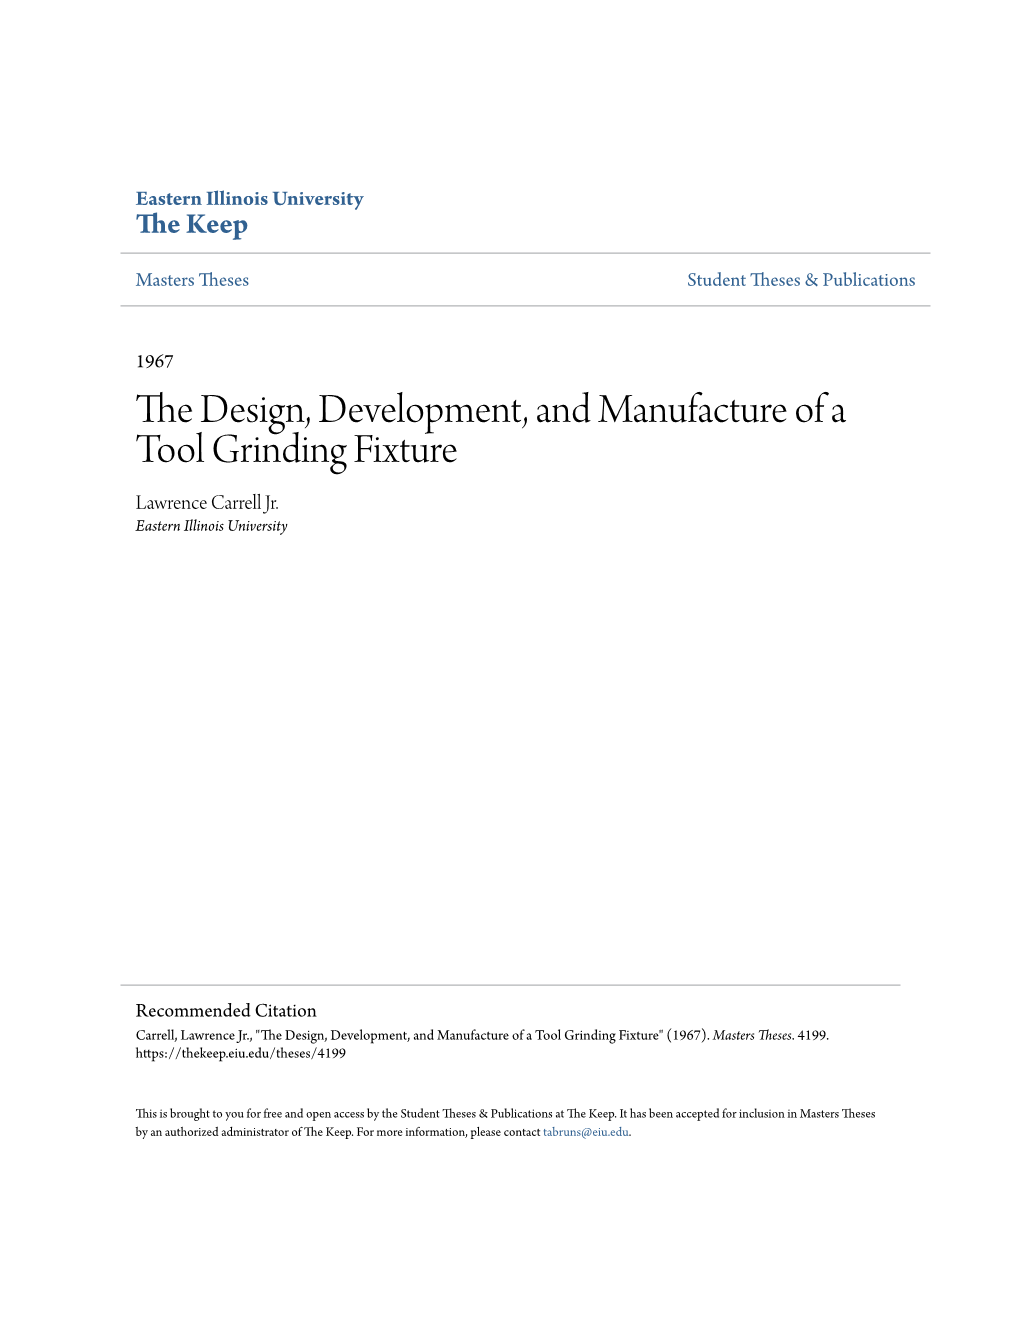 The Design, Development, and Manufacture of a Tool Grinding